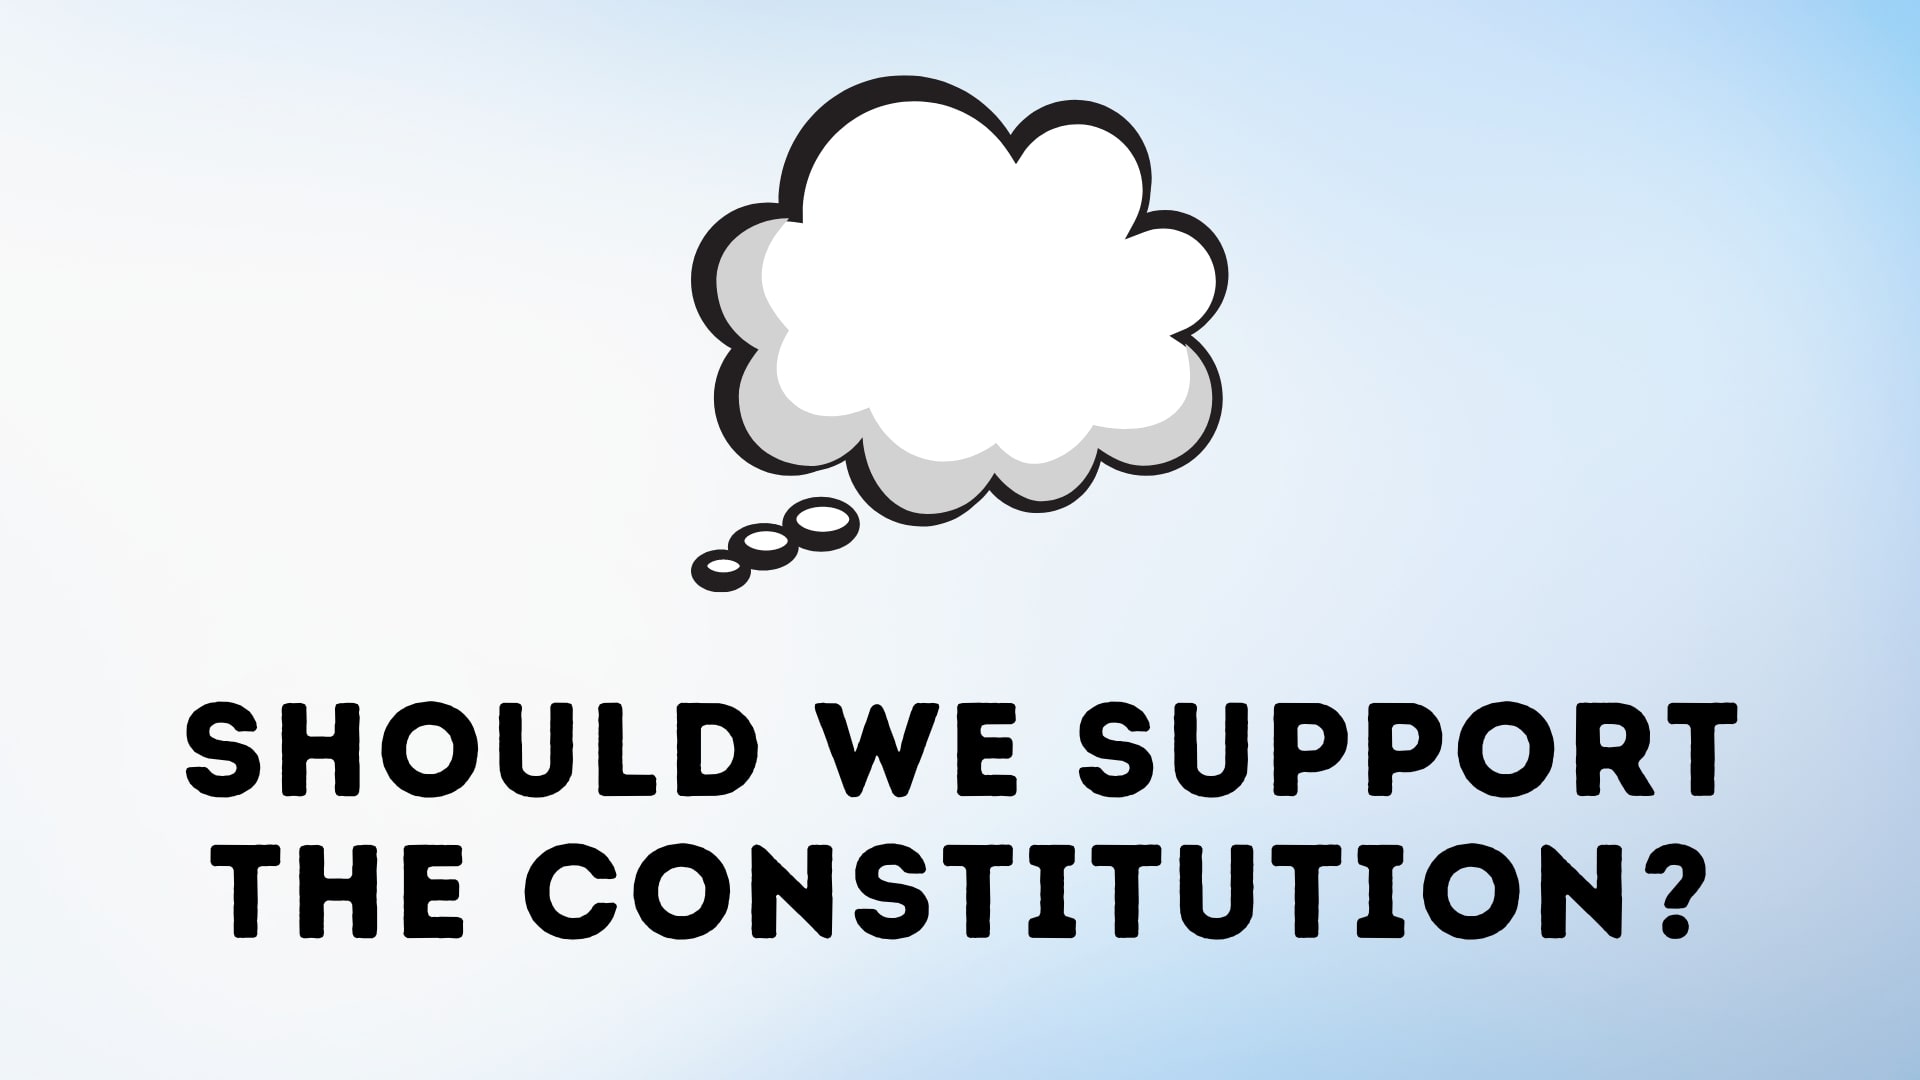 Should We Support the Constitution?